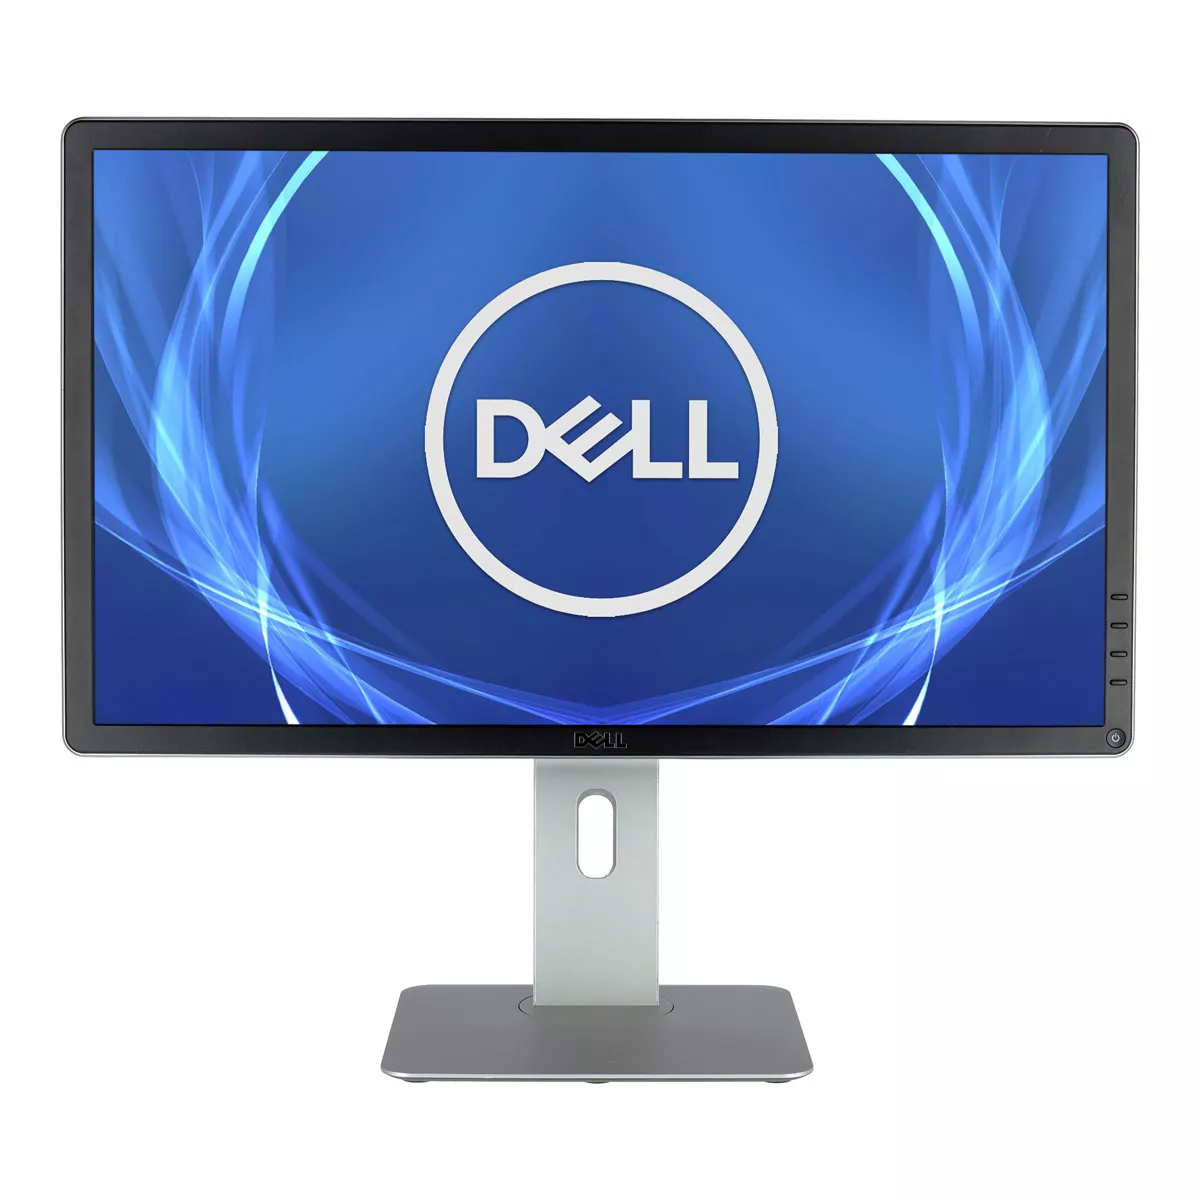 Dell P2414hb 24 Zoll LED A+